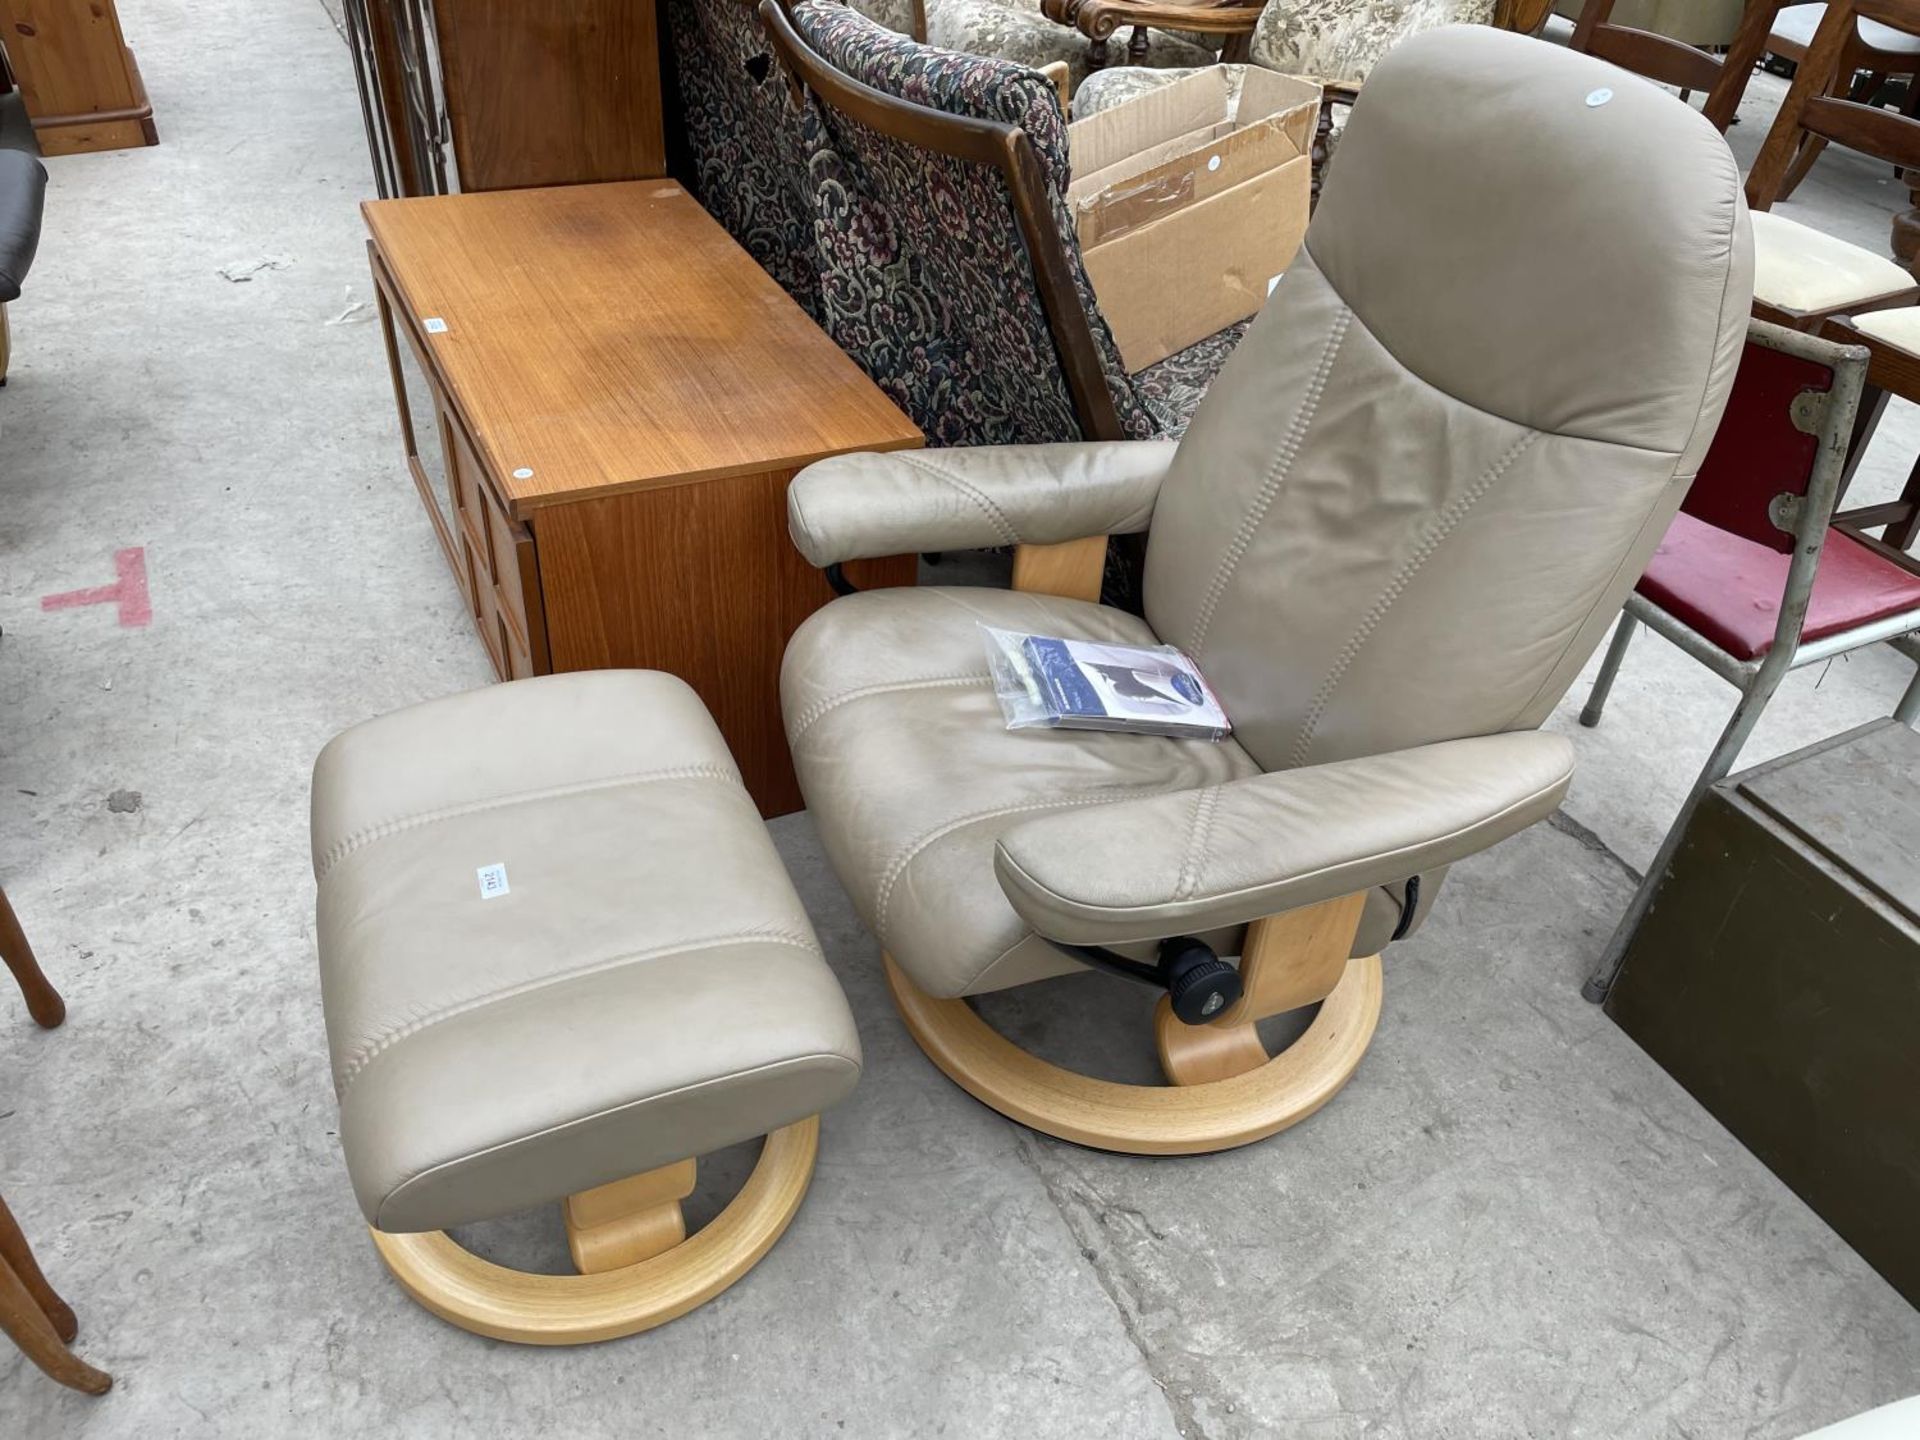 A STRESSLESS EKORNES RECLINER CHAIR COMPLETE WITH STOOL